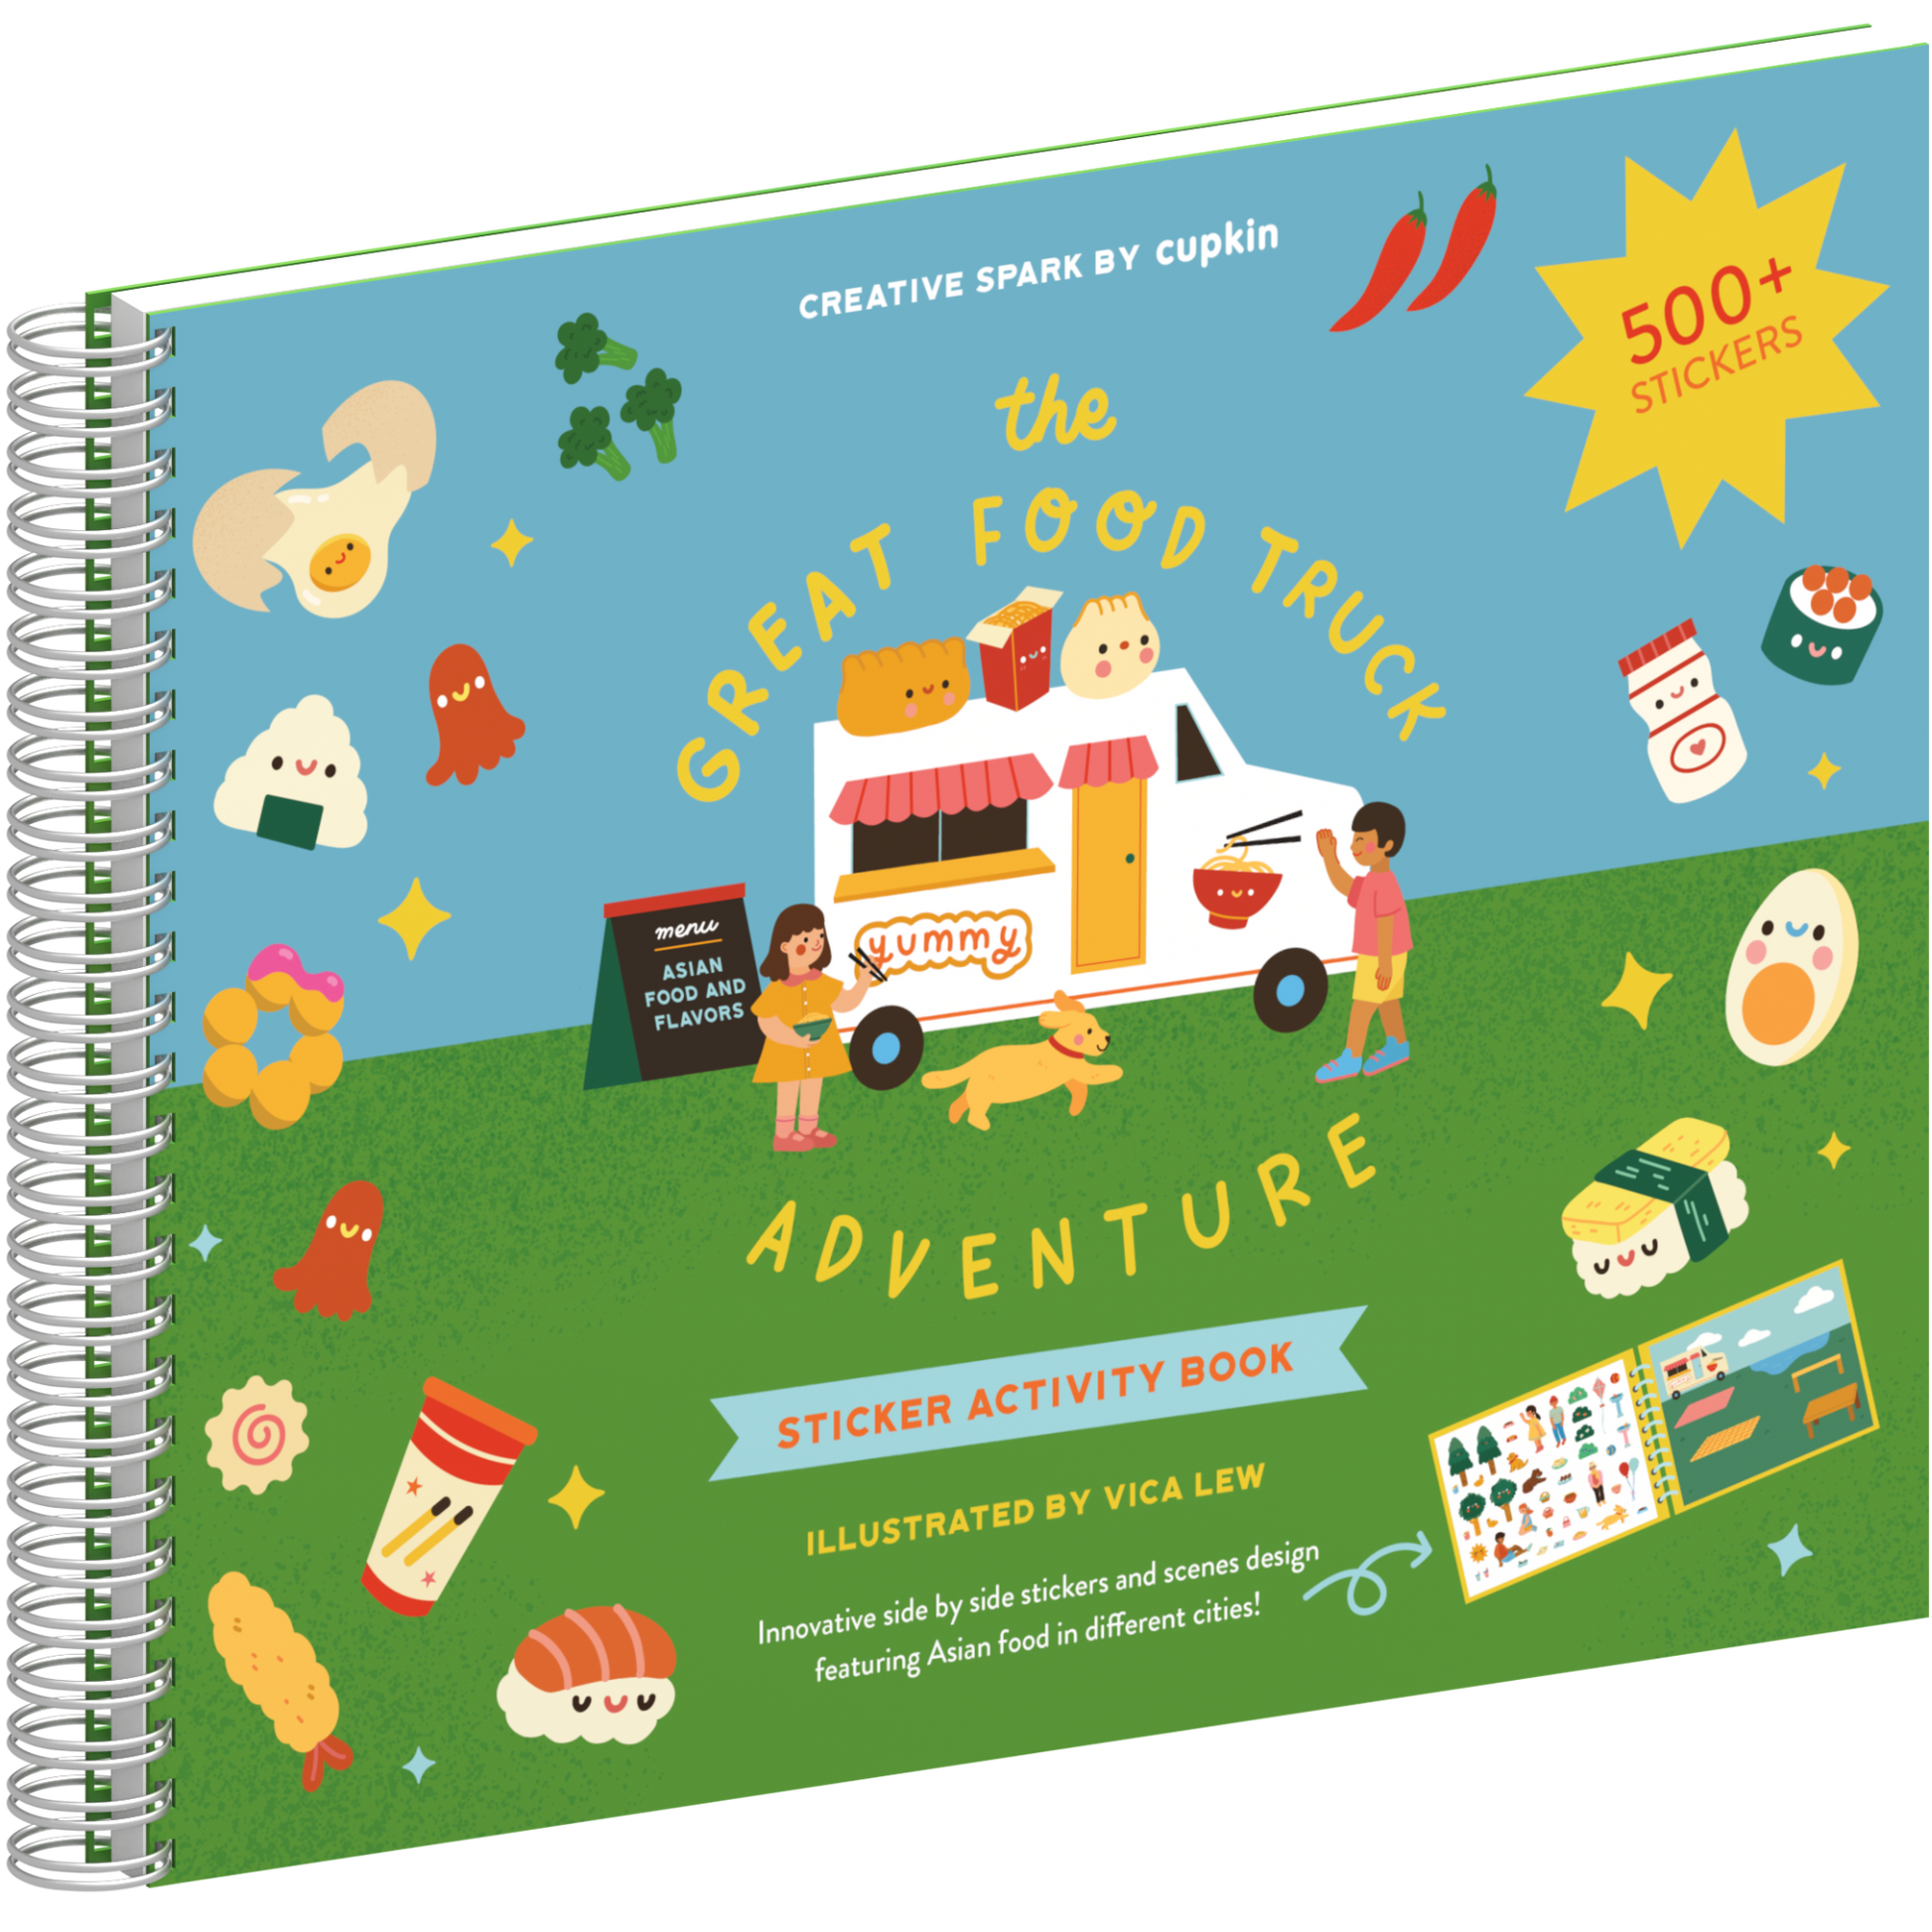 All Around Town Activity Book Innovative Side by Side Sticker Books - Spiral Binding allows The Sticker Book to Lay Flat - Over 500 Stickers and 12